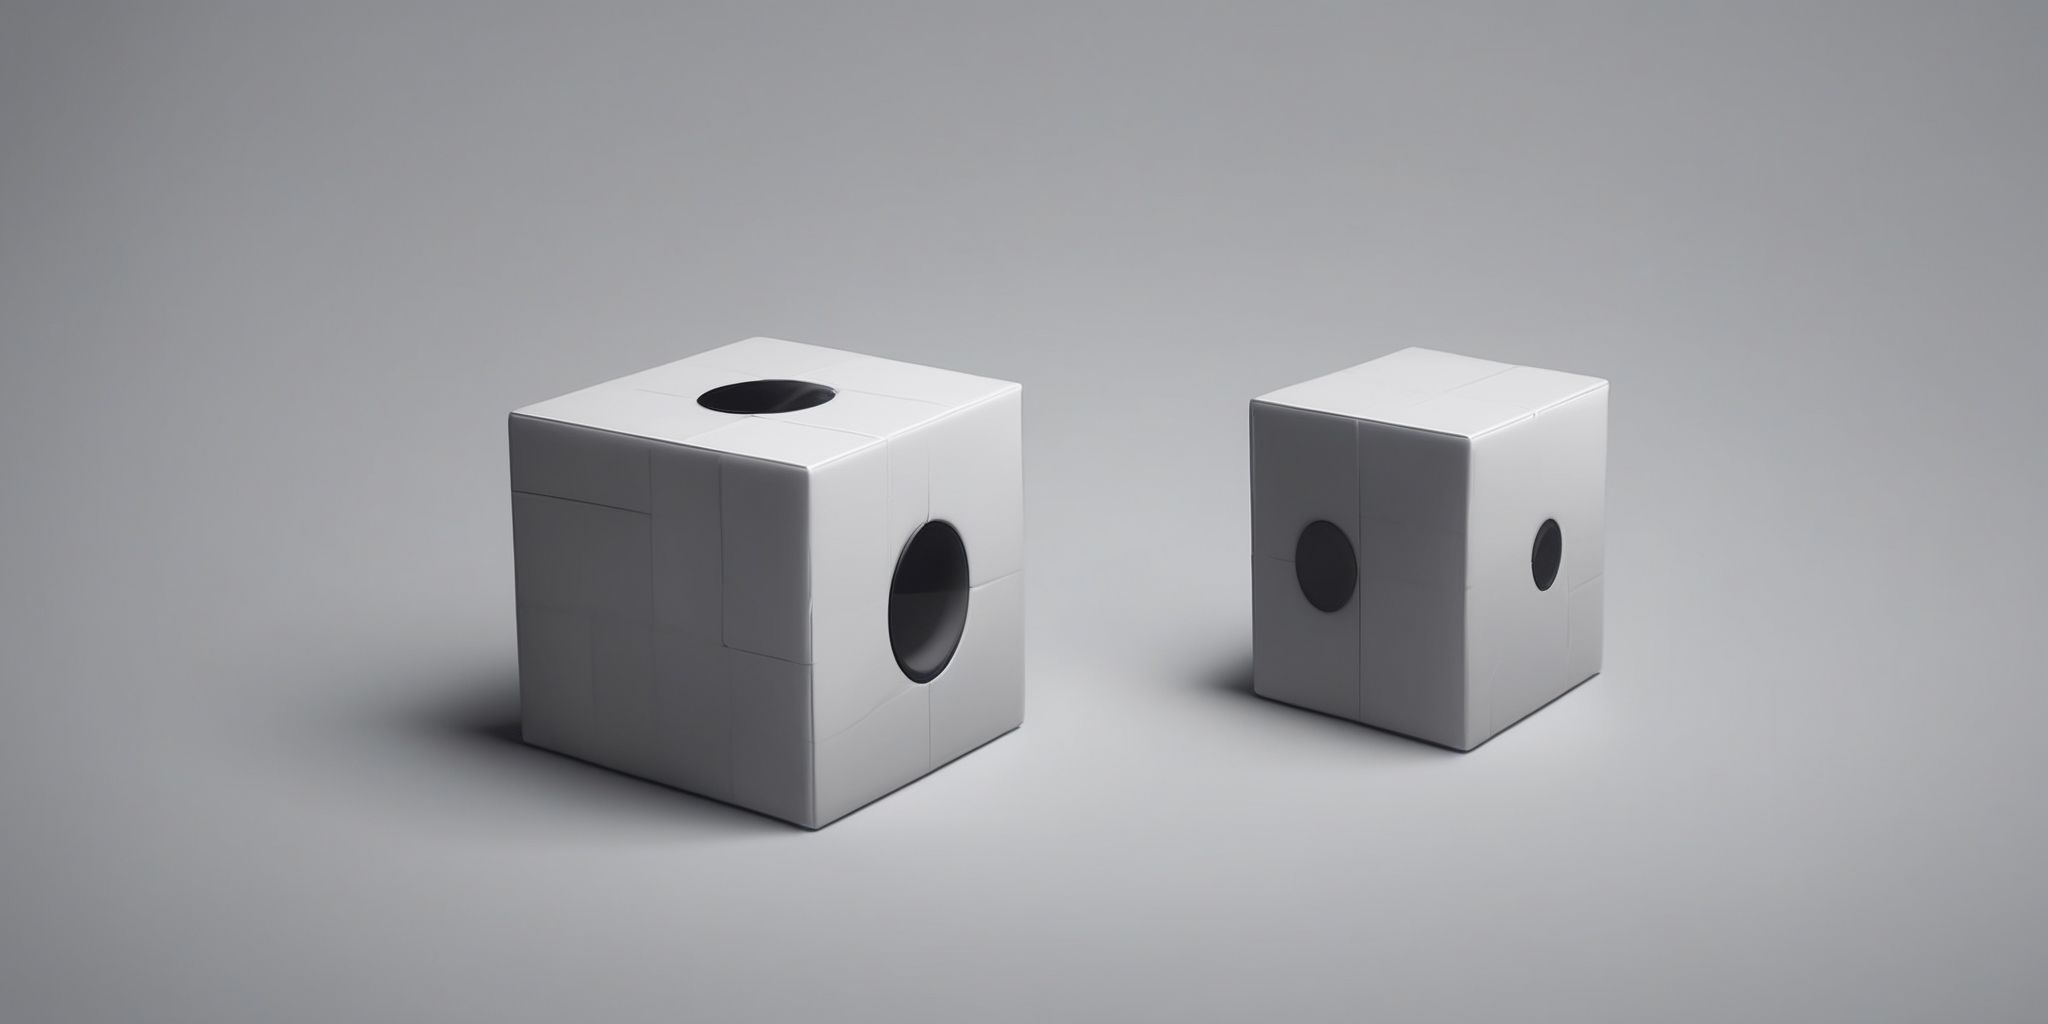 Cube  in realistic, photographic style